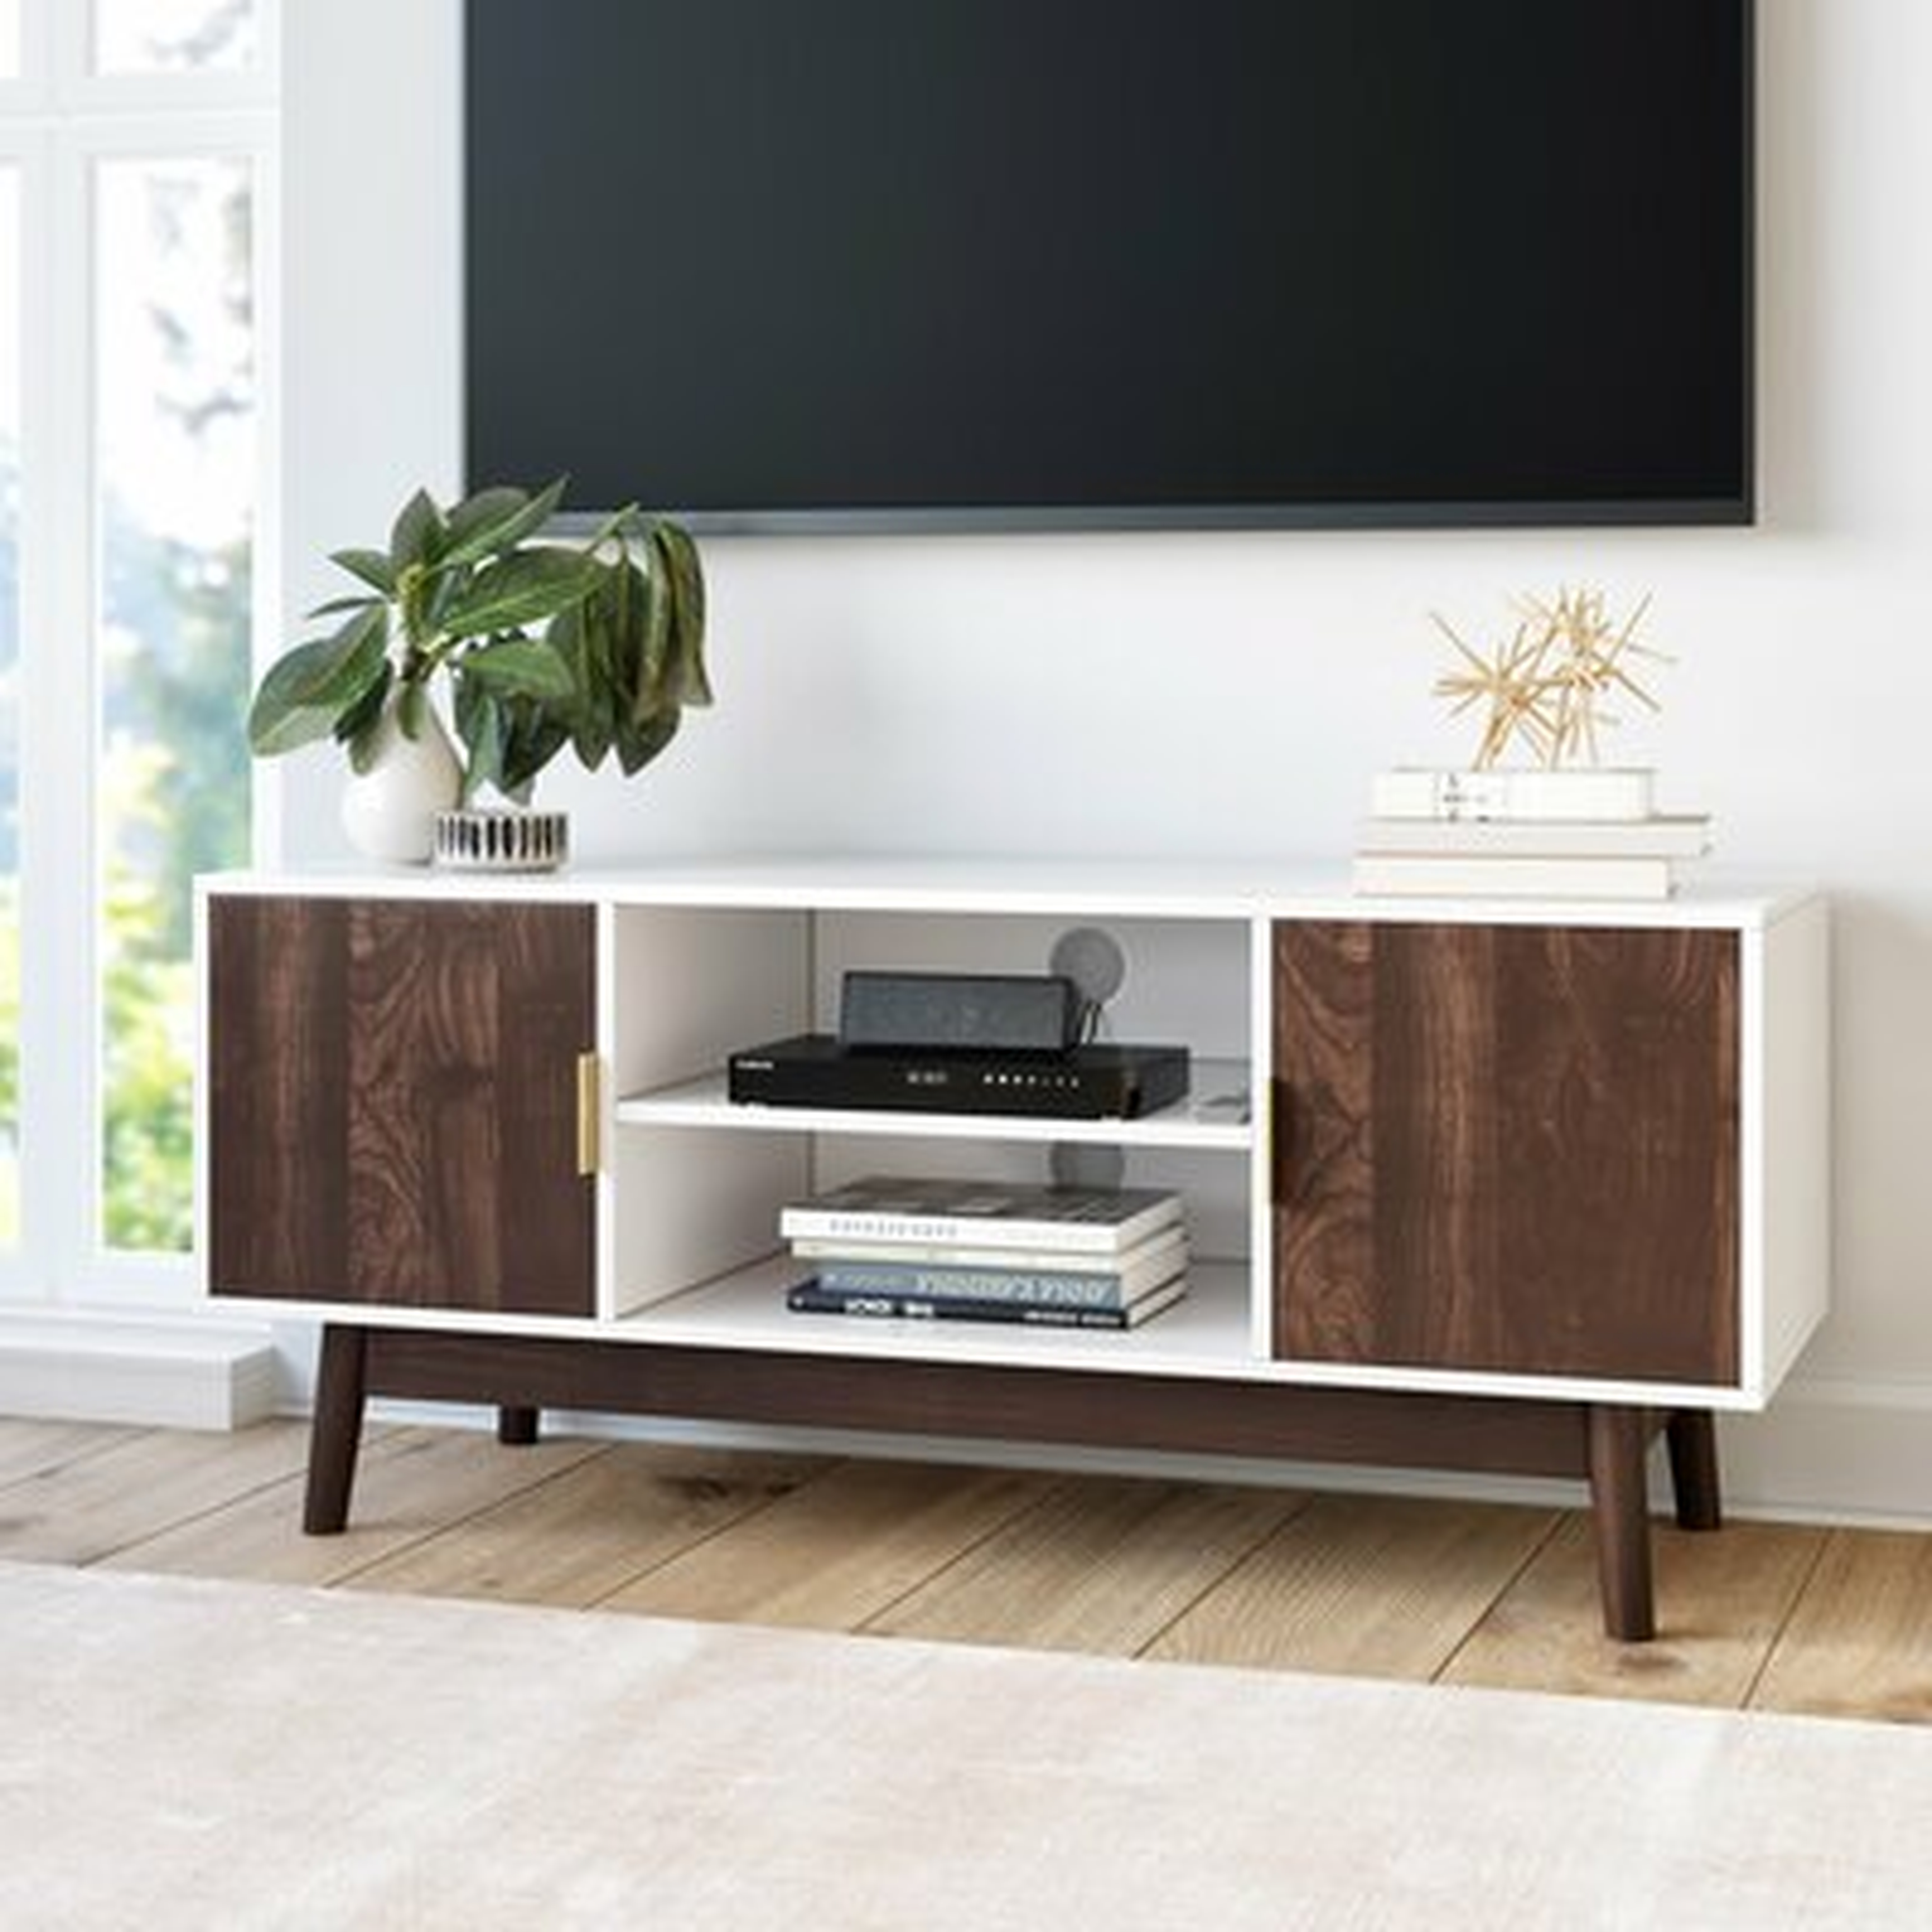 Gallaway TV Stand for TVs up to 49" - Wayfair